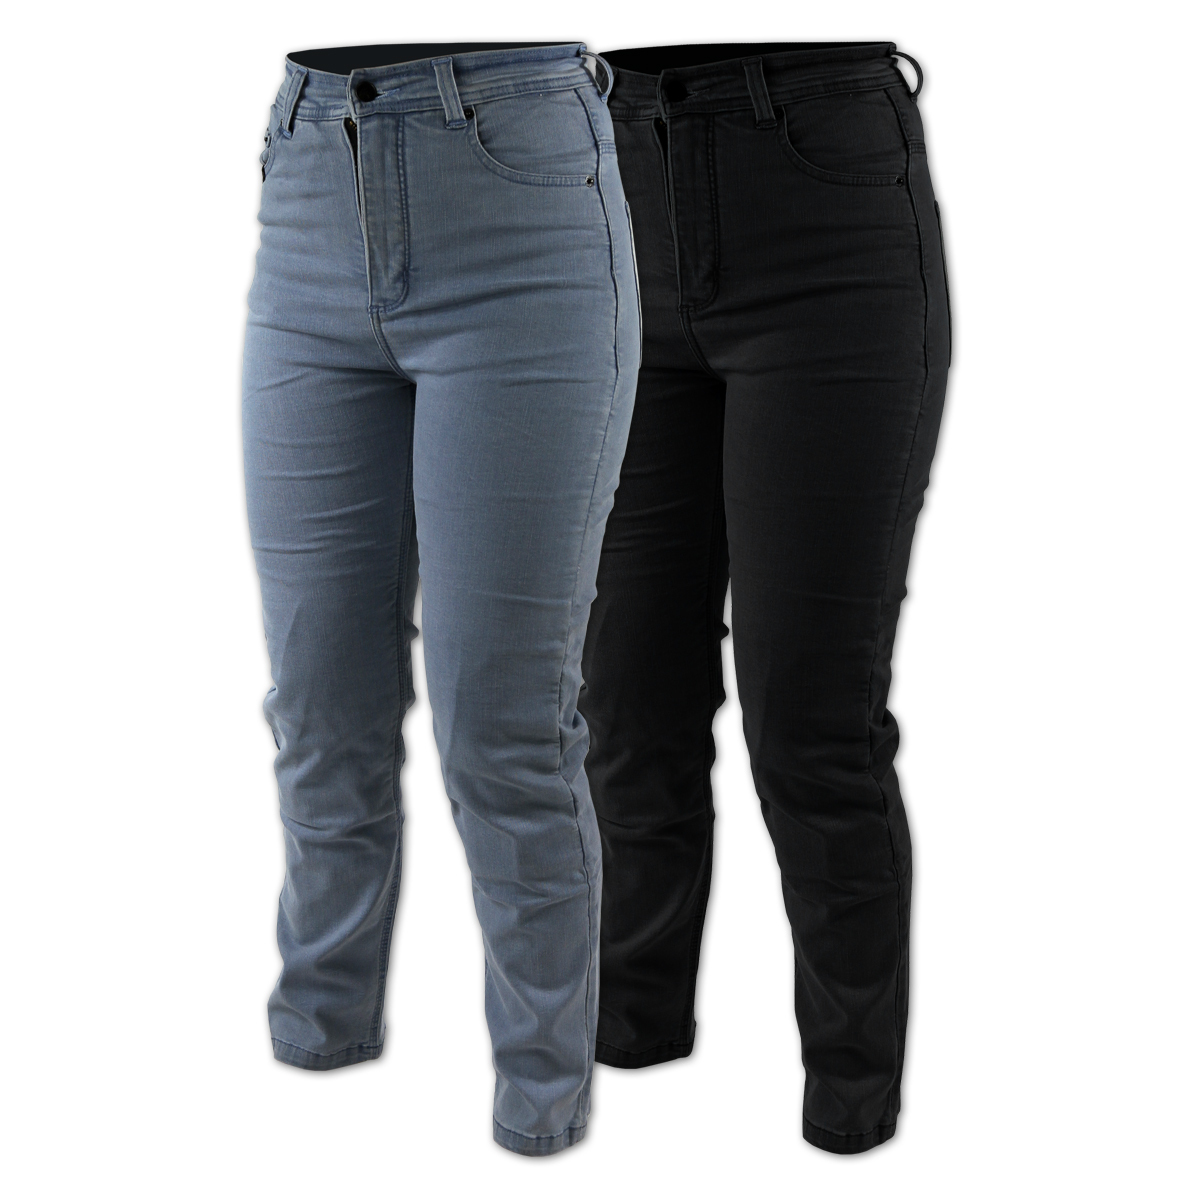 Shark MOM Relaxed Fit Protective Jeans - Shark Leathers